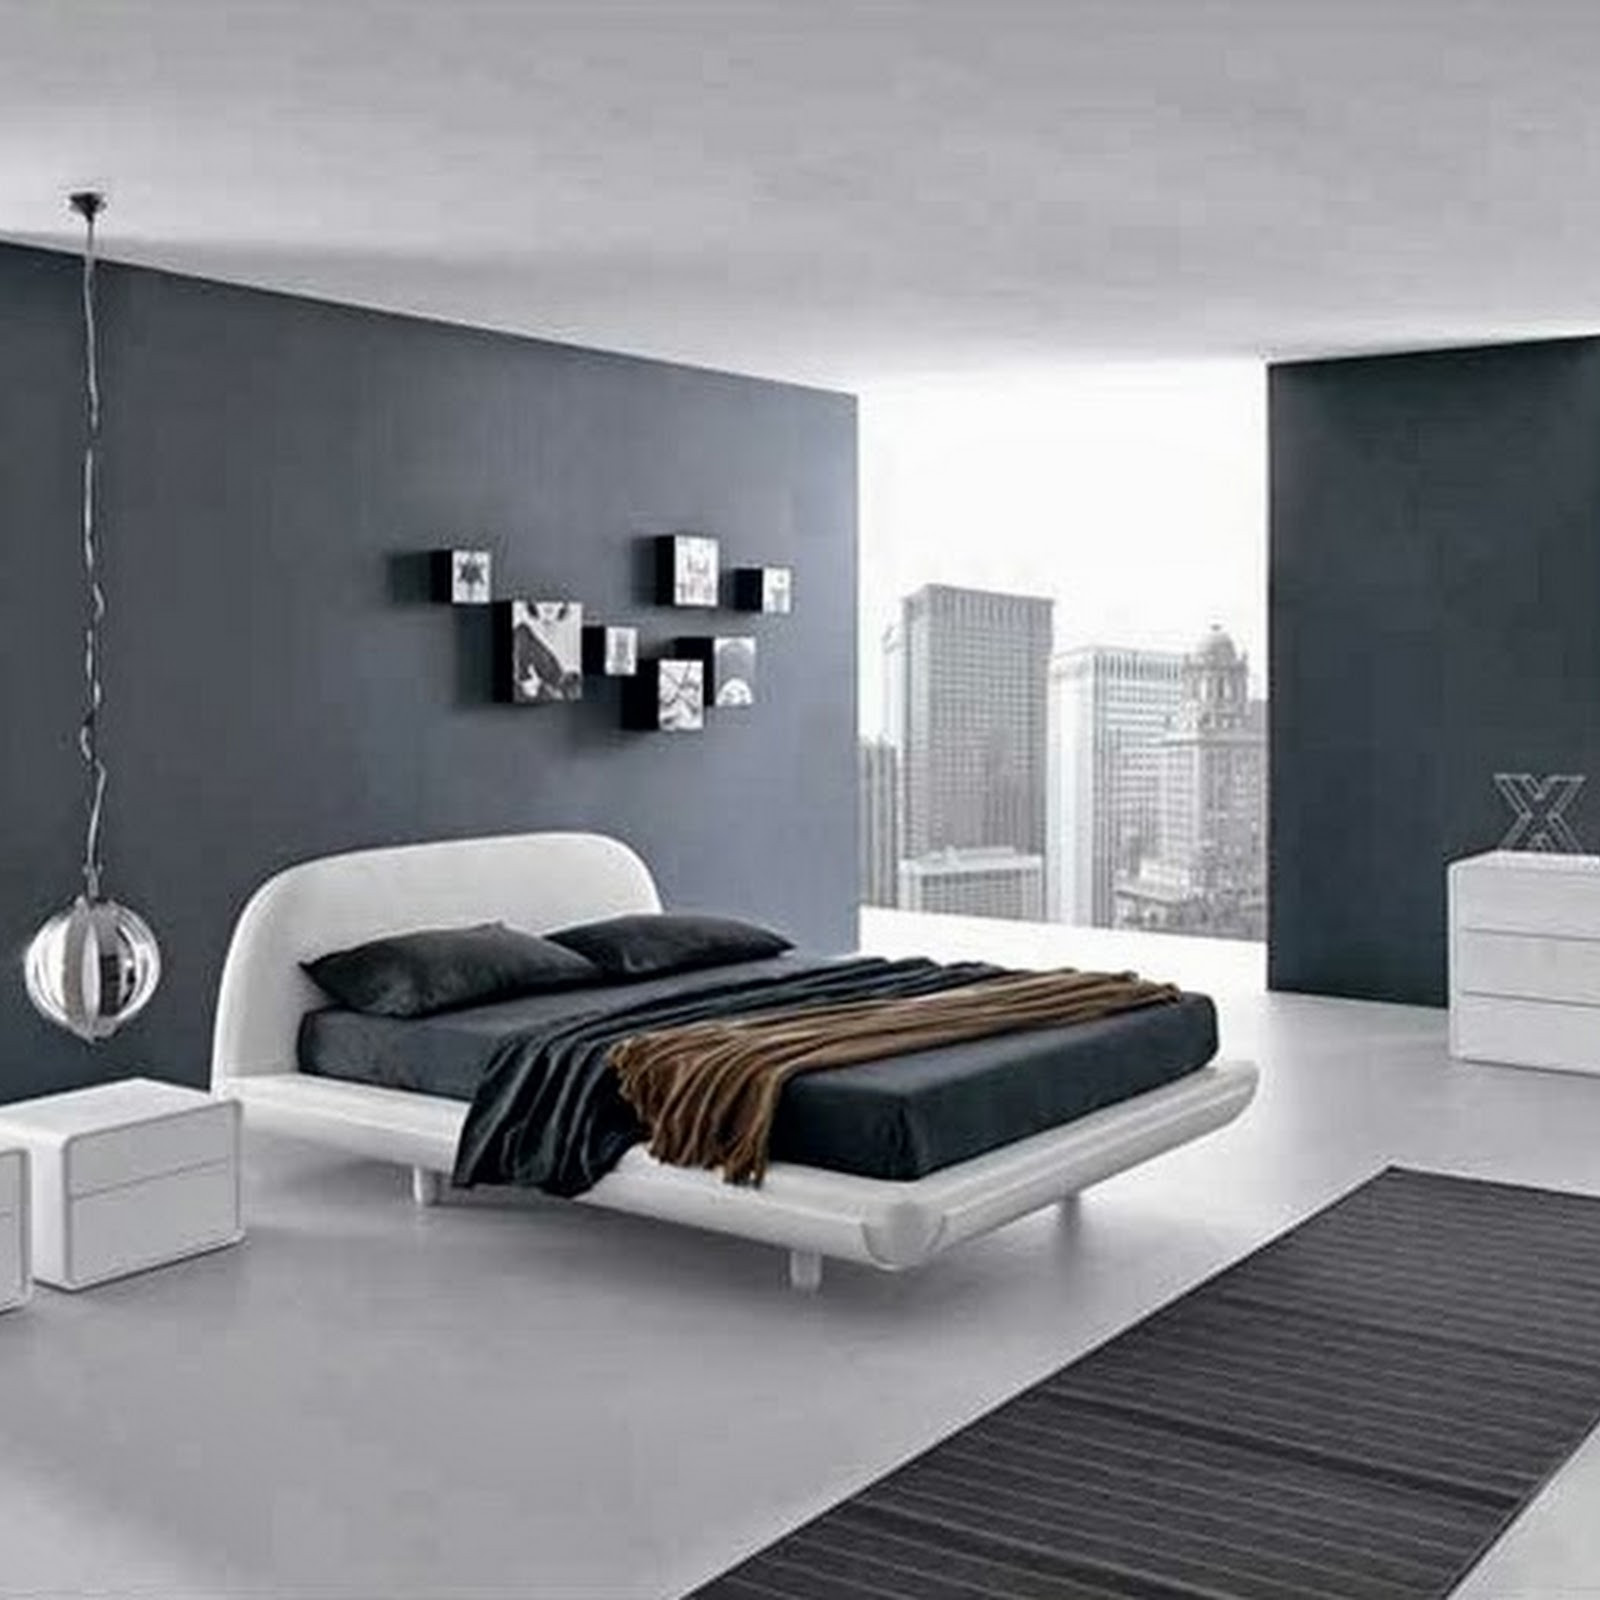 Bedroom Paint Colors Ideas
 Elegant Gray Paint Colors for Bedrooms – HomesFeed